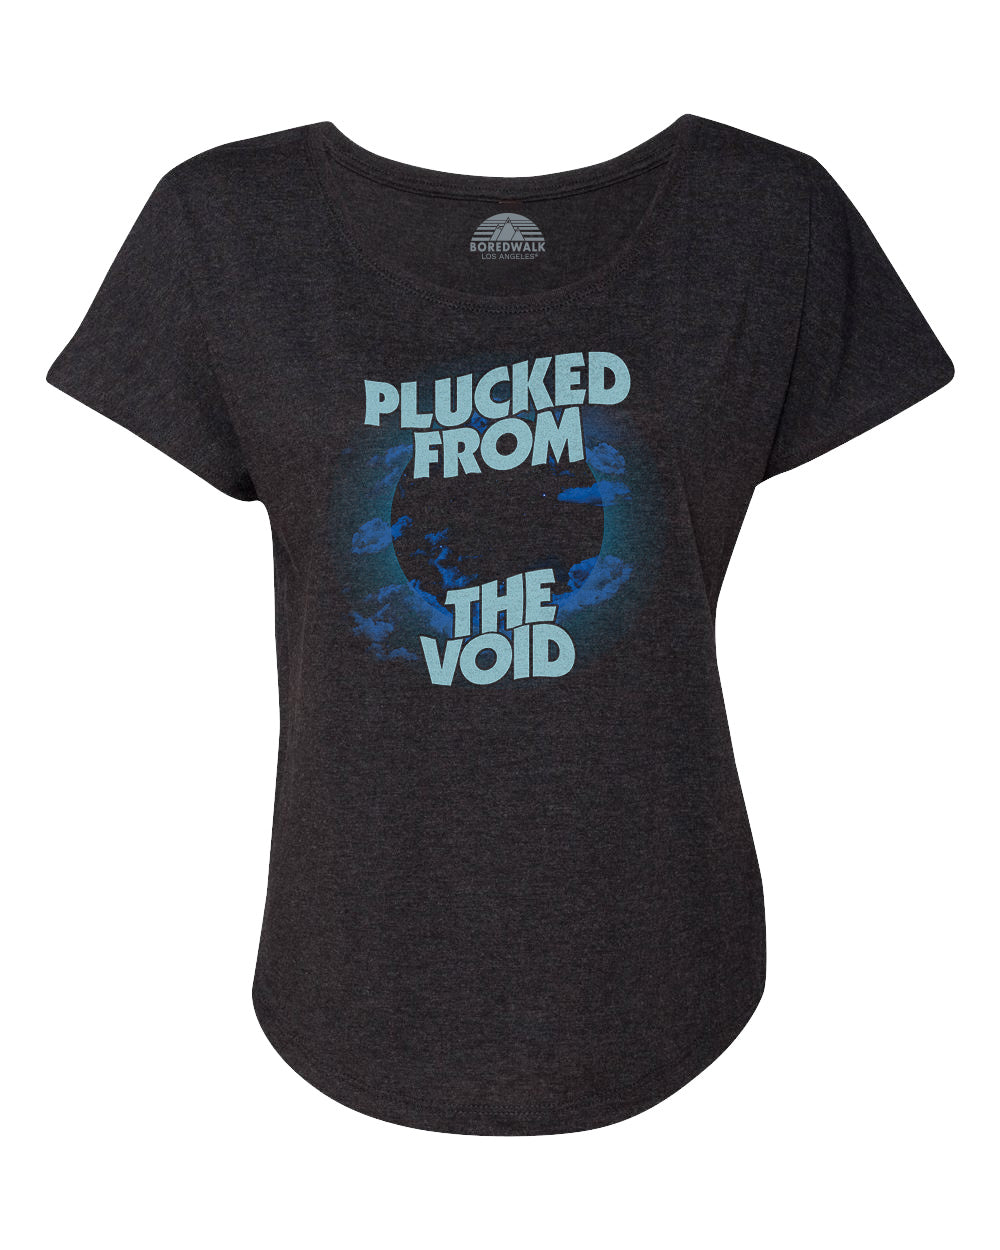 Women's Plucked From the Void Scoop Neck T-Shirt